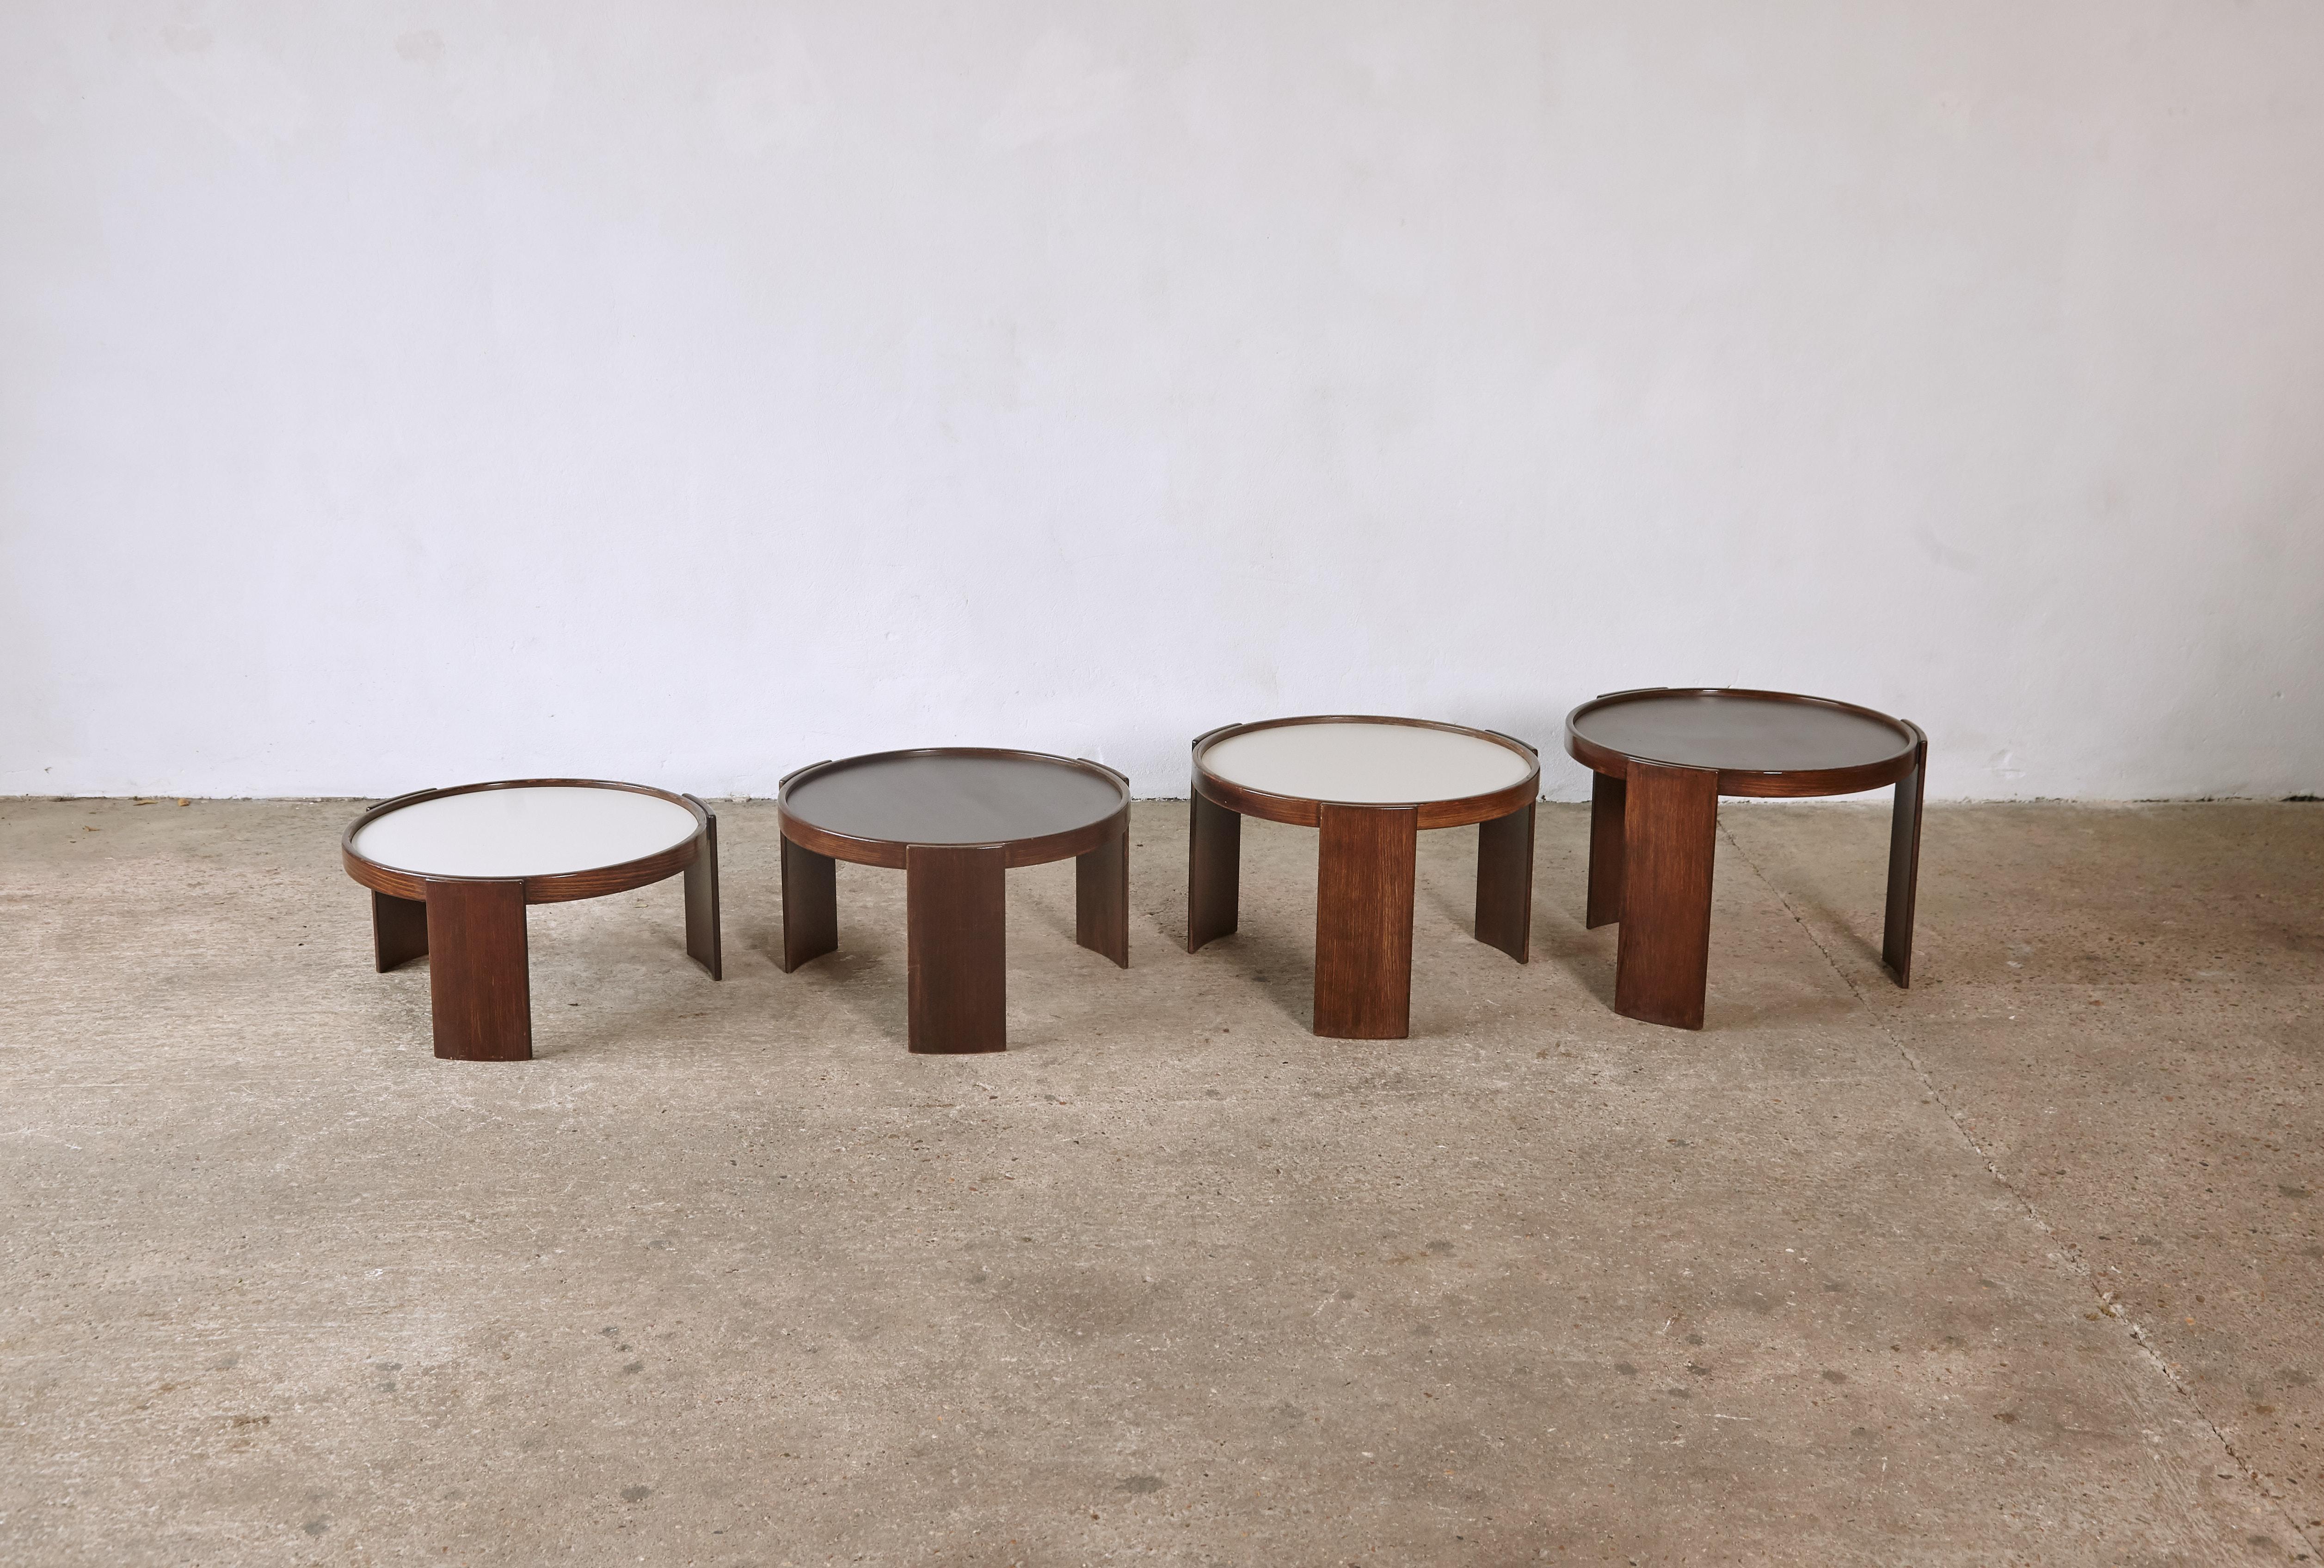 Larger than normal size Gianfranco Frattini stacking nest of tables for Cassina, Italy, 1970s. Wooden frames and reversible laminate tops (reversible from brown to white). With Cassina makers labels. Good condition with minor blemishes relative to